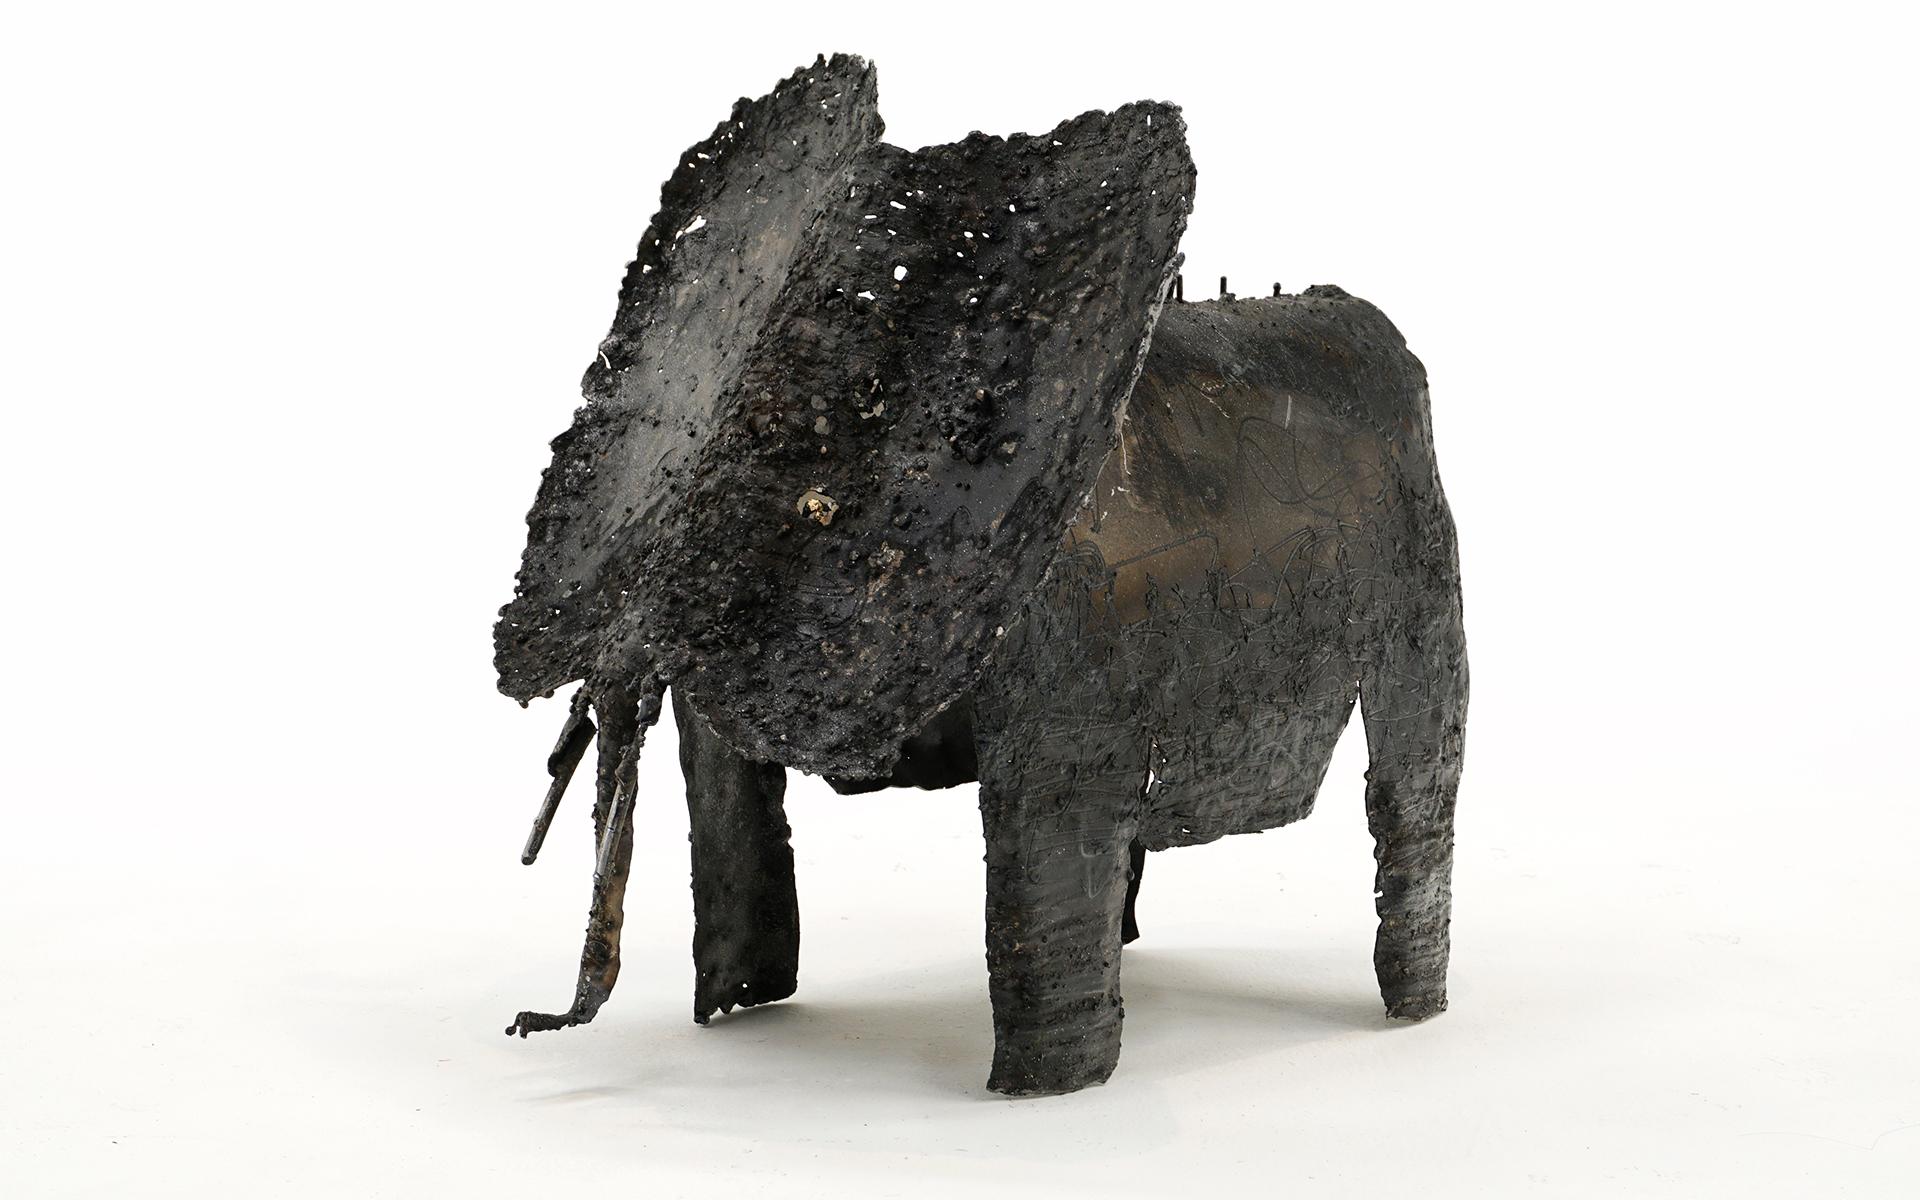 Table top elephant sculpture by listed artist James Bearden. Original condition as the artist intended. Acquired directly from the artist.